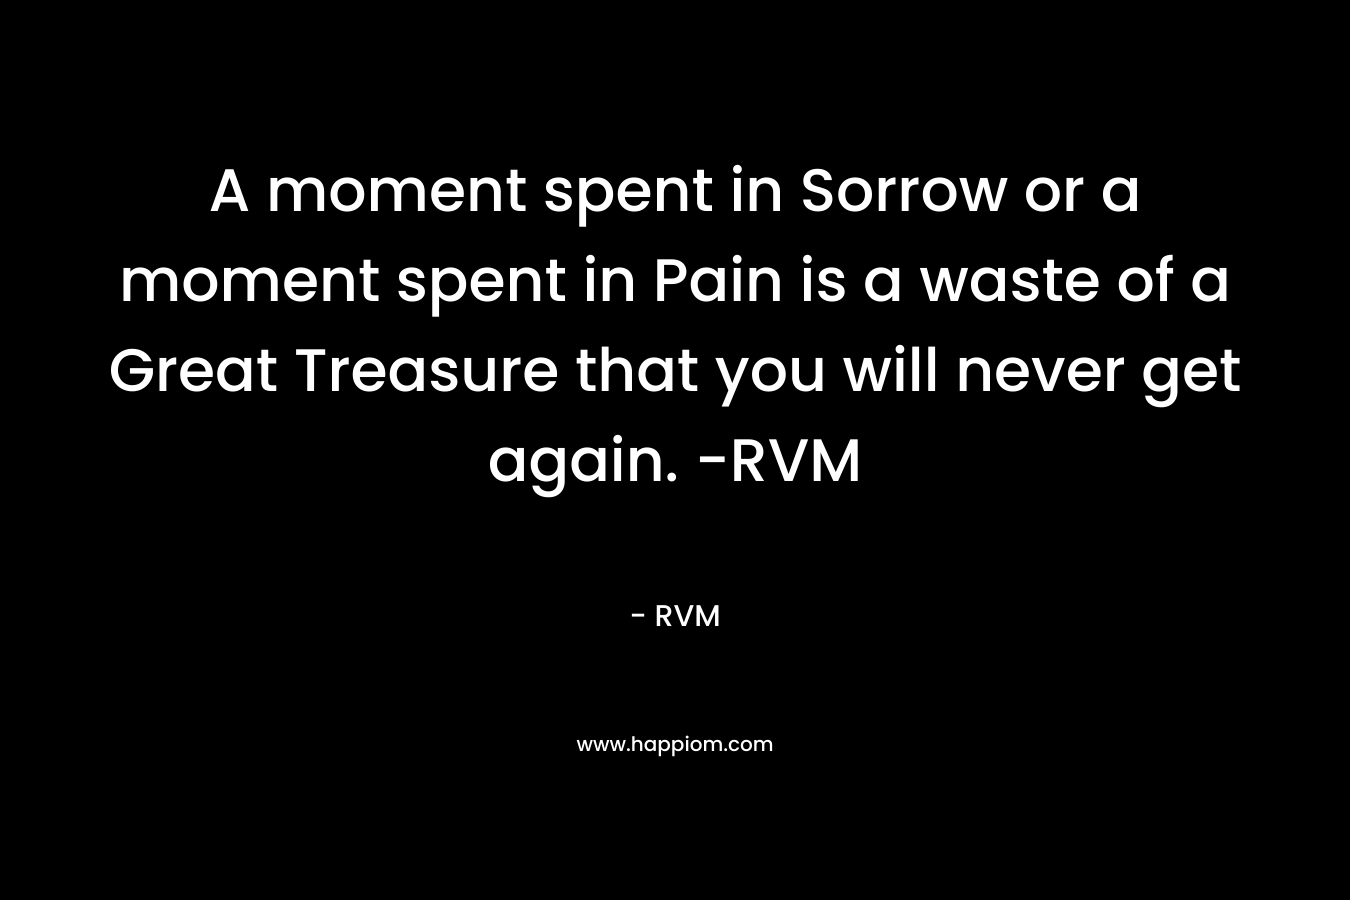 A moment spent in Sorrow or a moment spent in Pain is a waste of a Great Treasure that you will never get again. -RVM